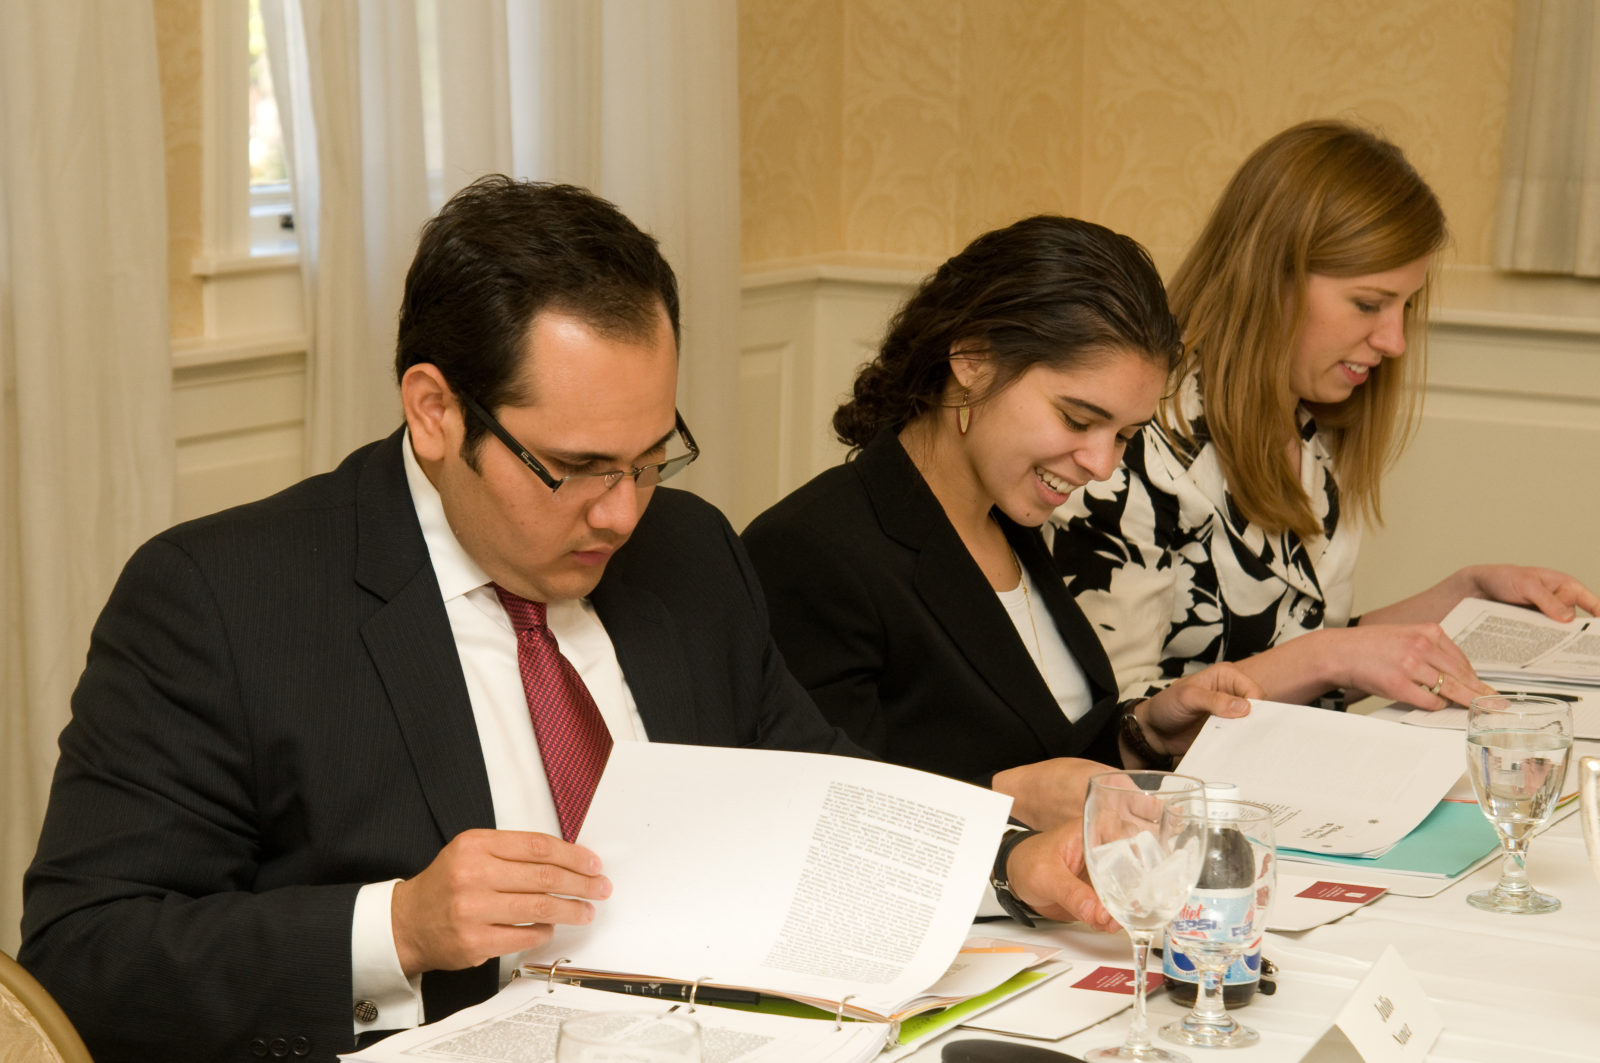 (l.-r.) Julio Nunez (J 08), Christina Mandour-Brackin (HK 08) and Rochelle Olson (B 08) look over the reading materials during Eric Daniels' session on “What would Ayn Rand say about the Economic Crisis.”